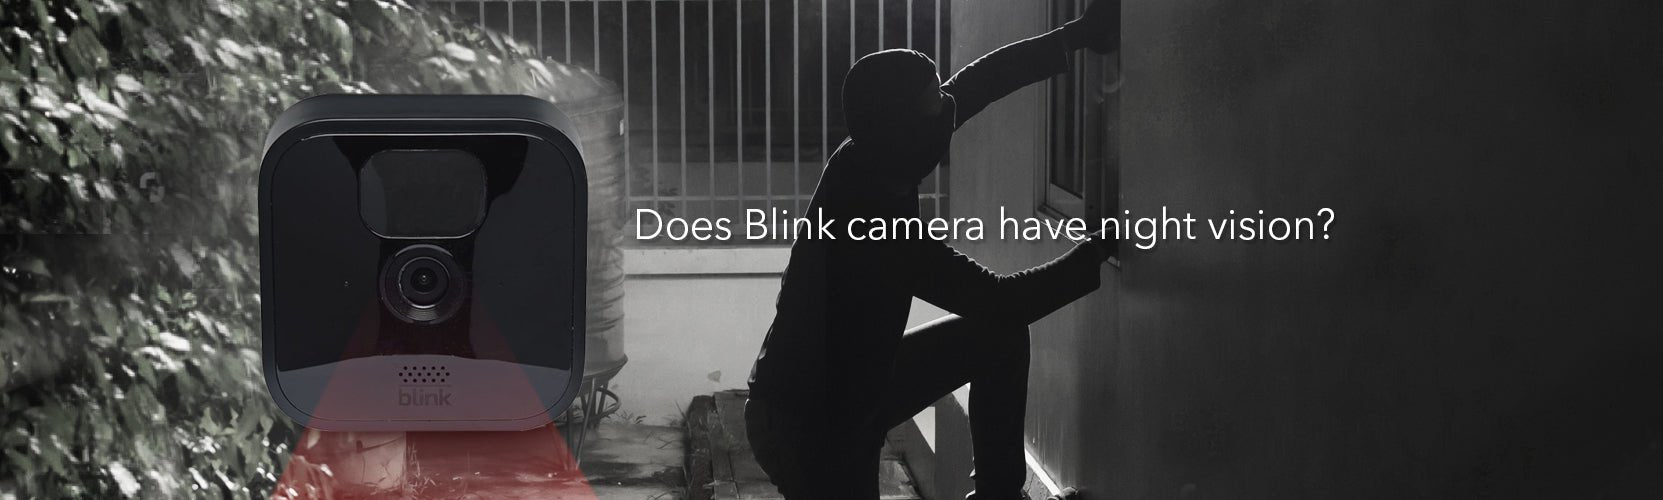 Does Blink camera have night vision?